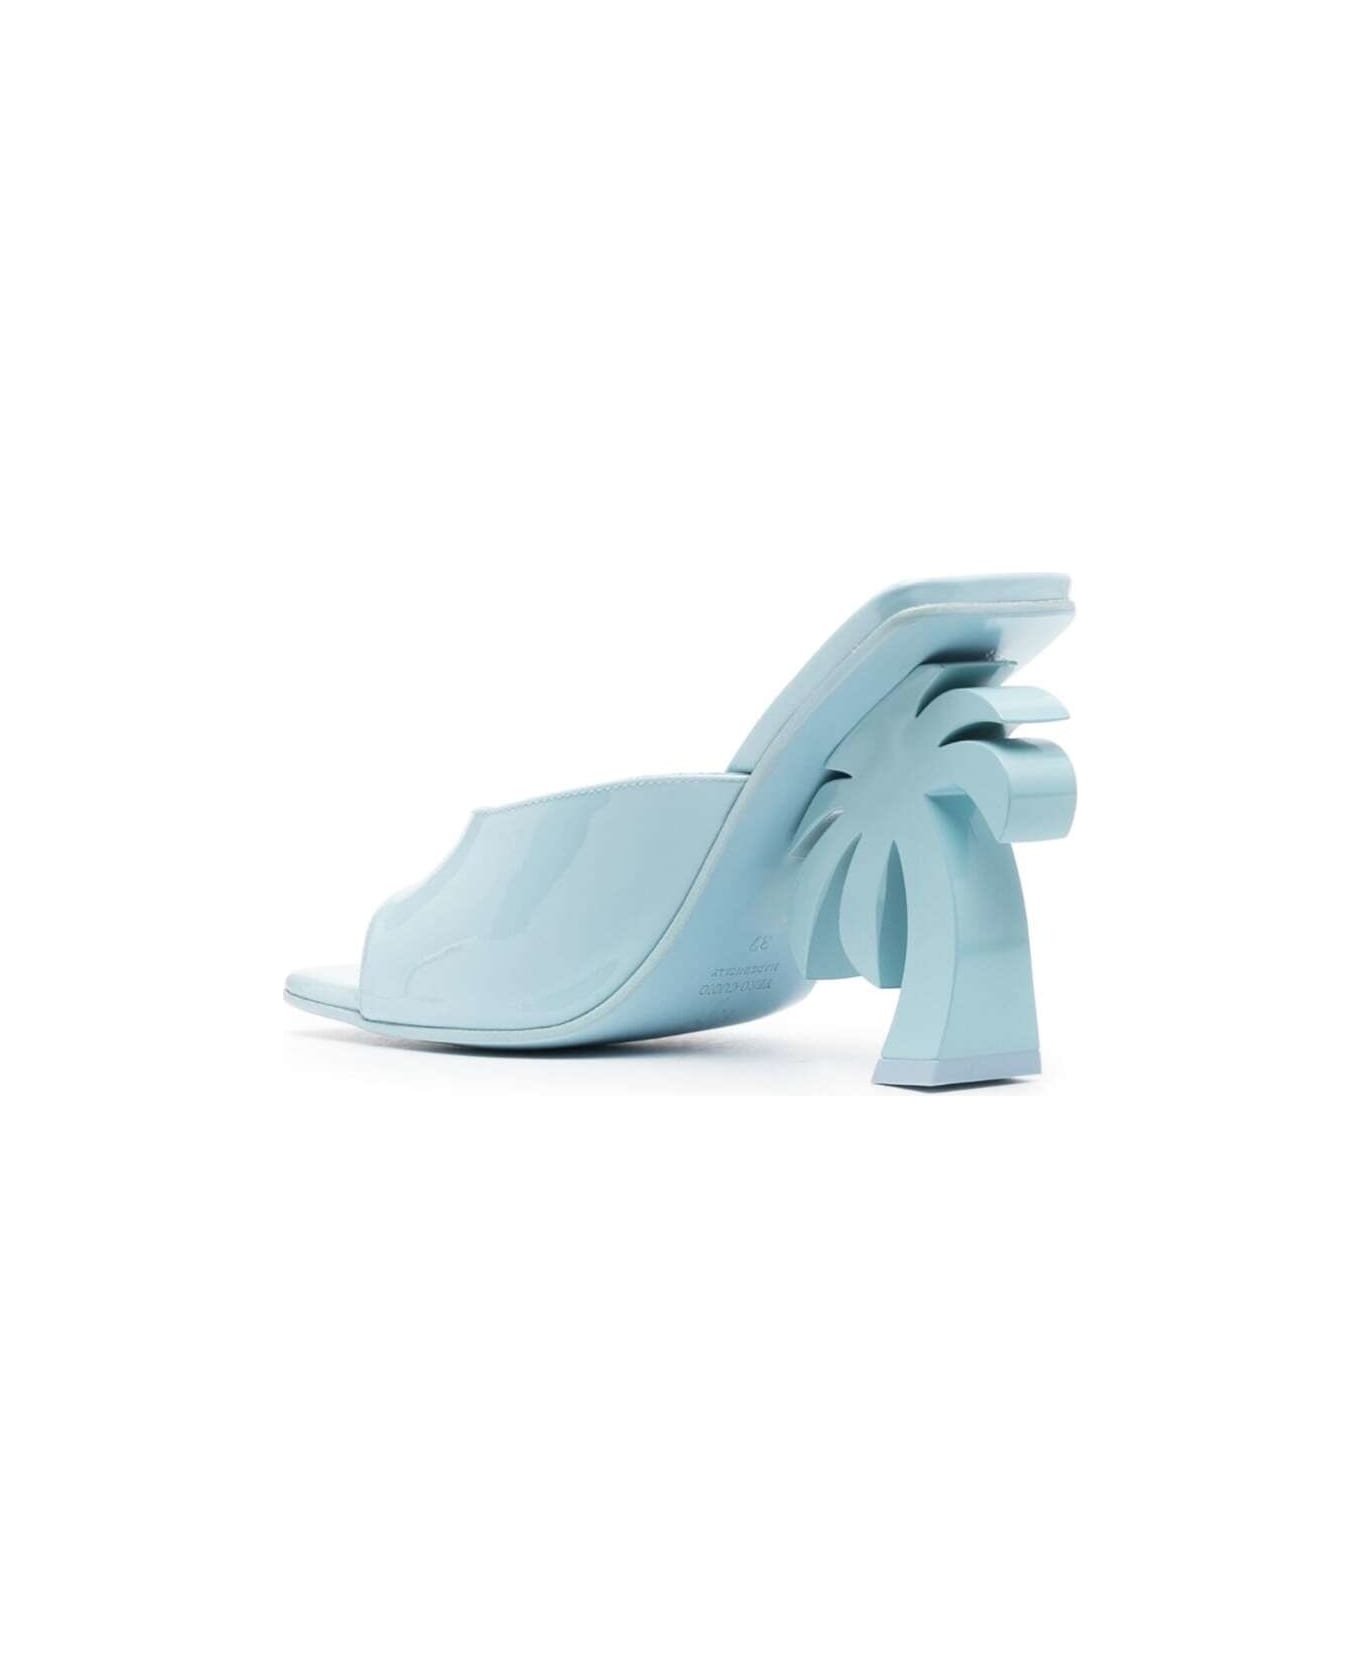 Palm Angels 'palm Tree' Blue Mules With Palm Tree-shaped Heel In Leather Woman - Light blue サンダル